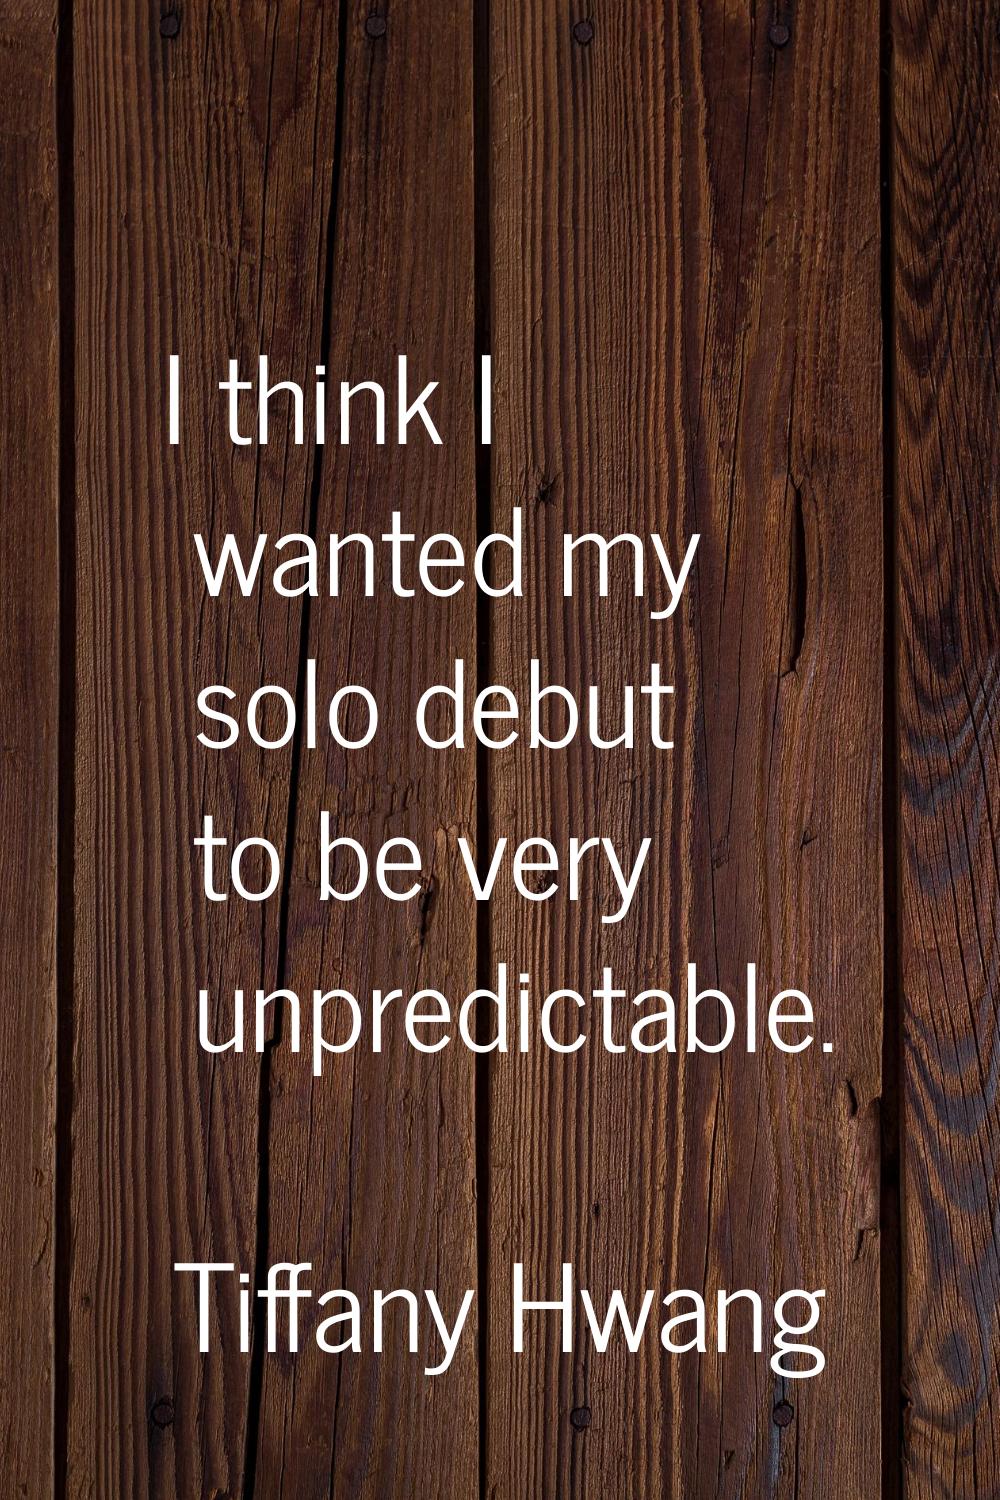 I think I wanted my solo debut to be very unpredictable.